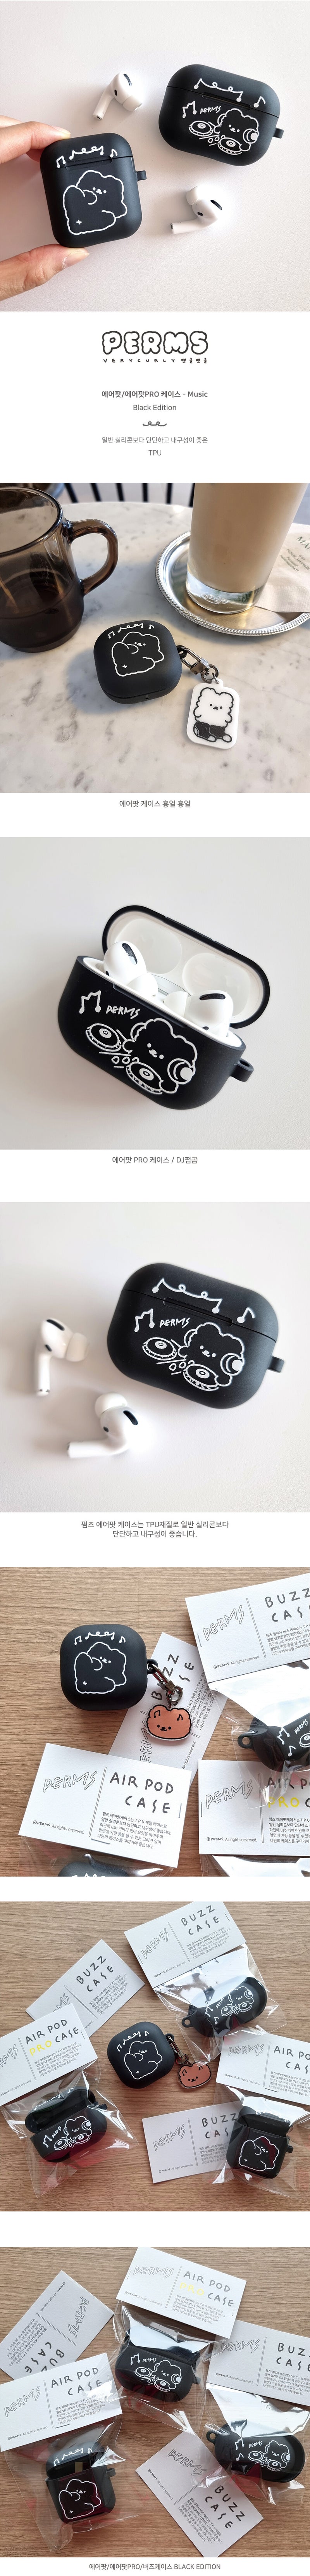 AirPods/AirPods Pro Case_Music